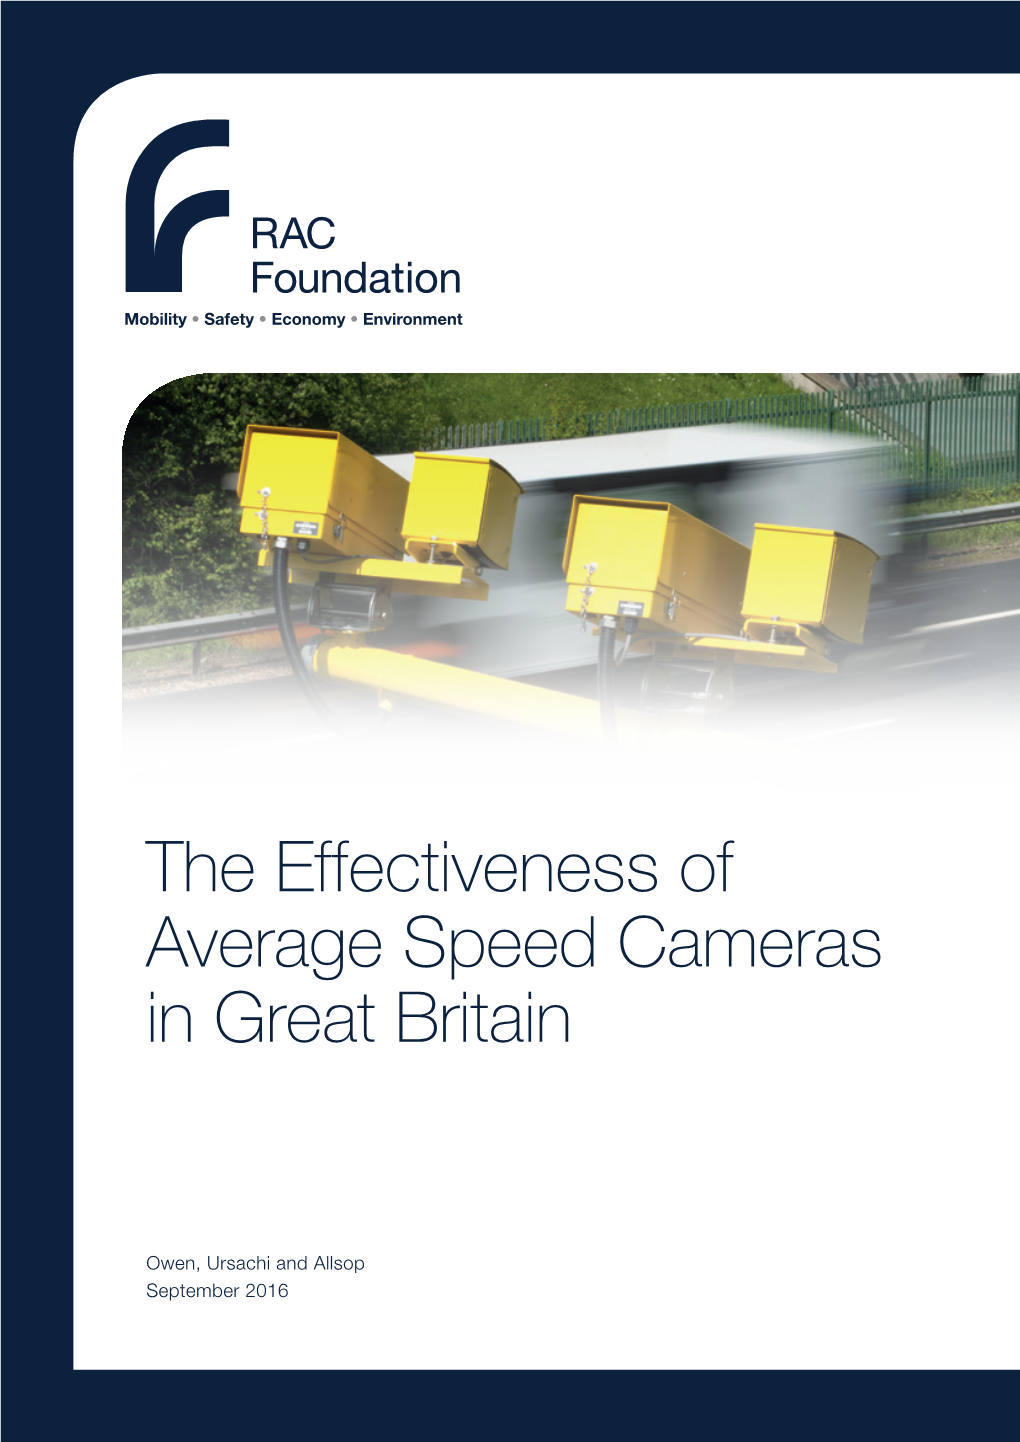 The Effectiveness of Average Speed Cameras in Great Britain